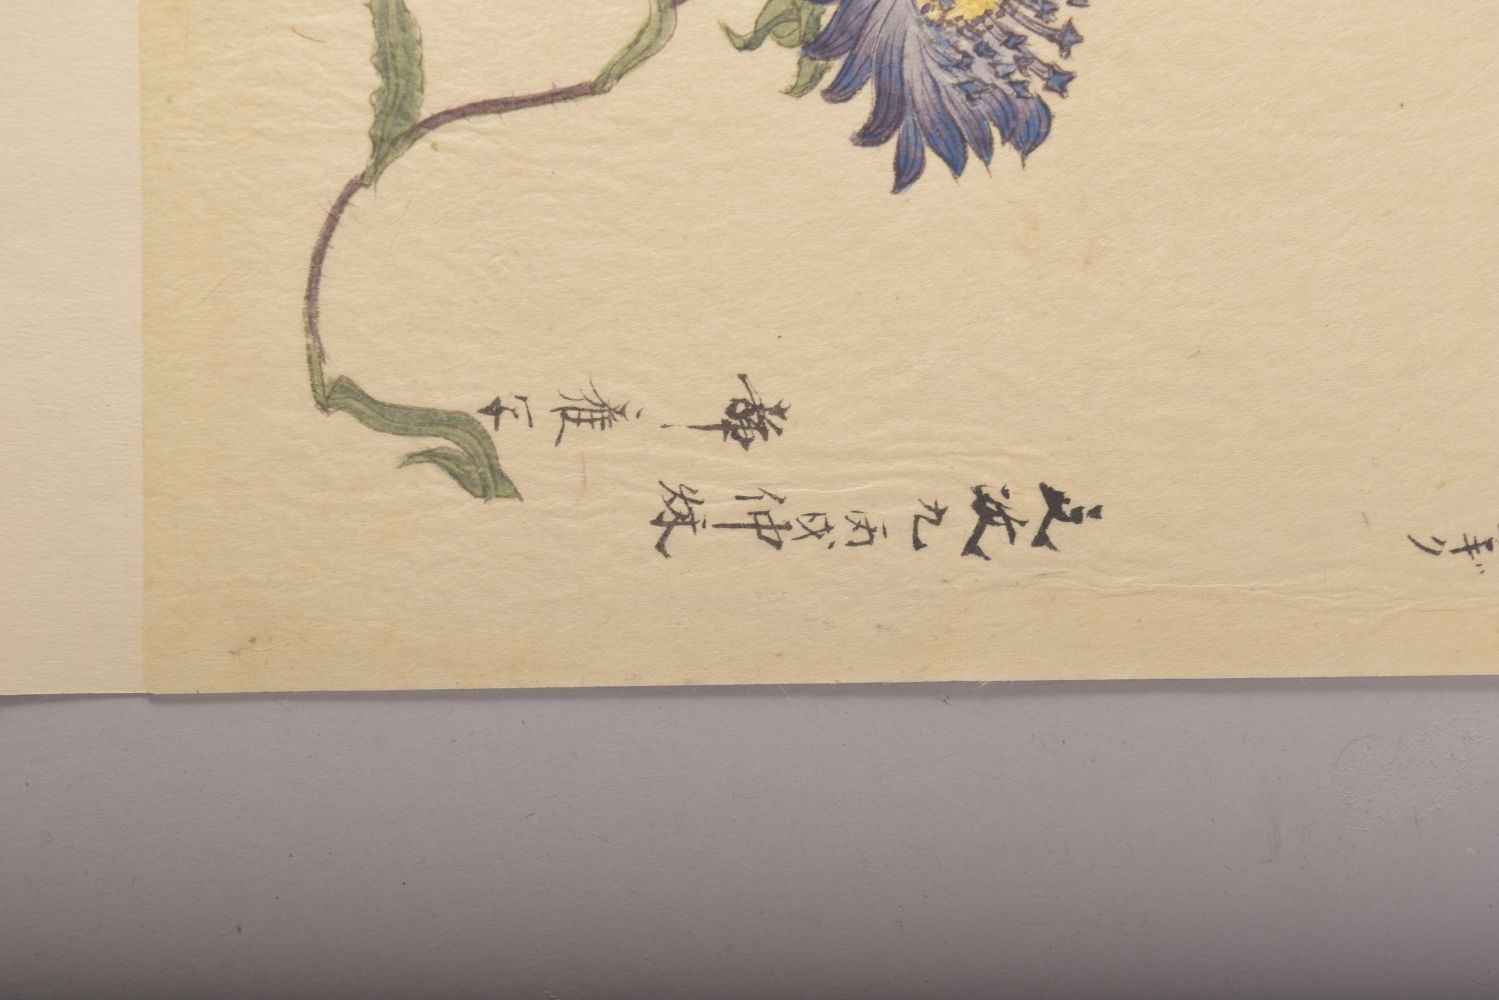 TWO JAPANESE MEIJI / TAISHO PAINTINGS OF FLOWERS ON PAPER, signed, image 27cm x 18cm and 28cm x 18. - Image 5 of 10